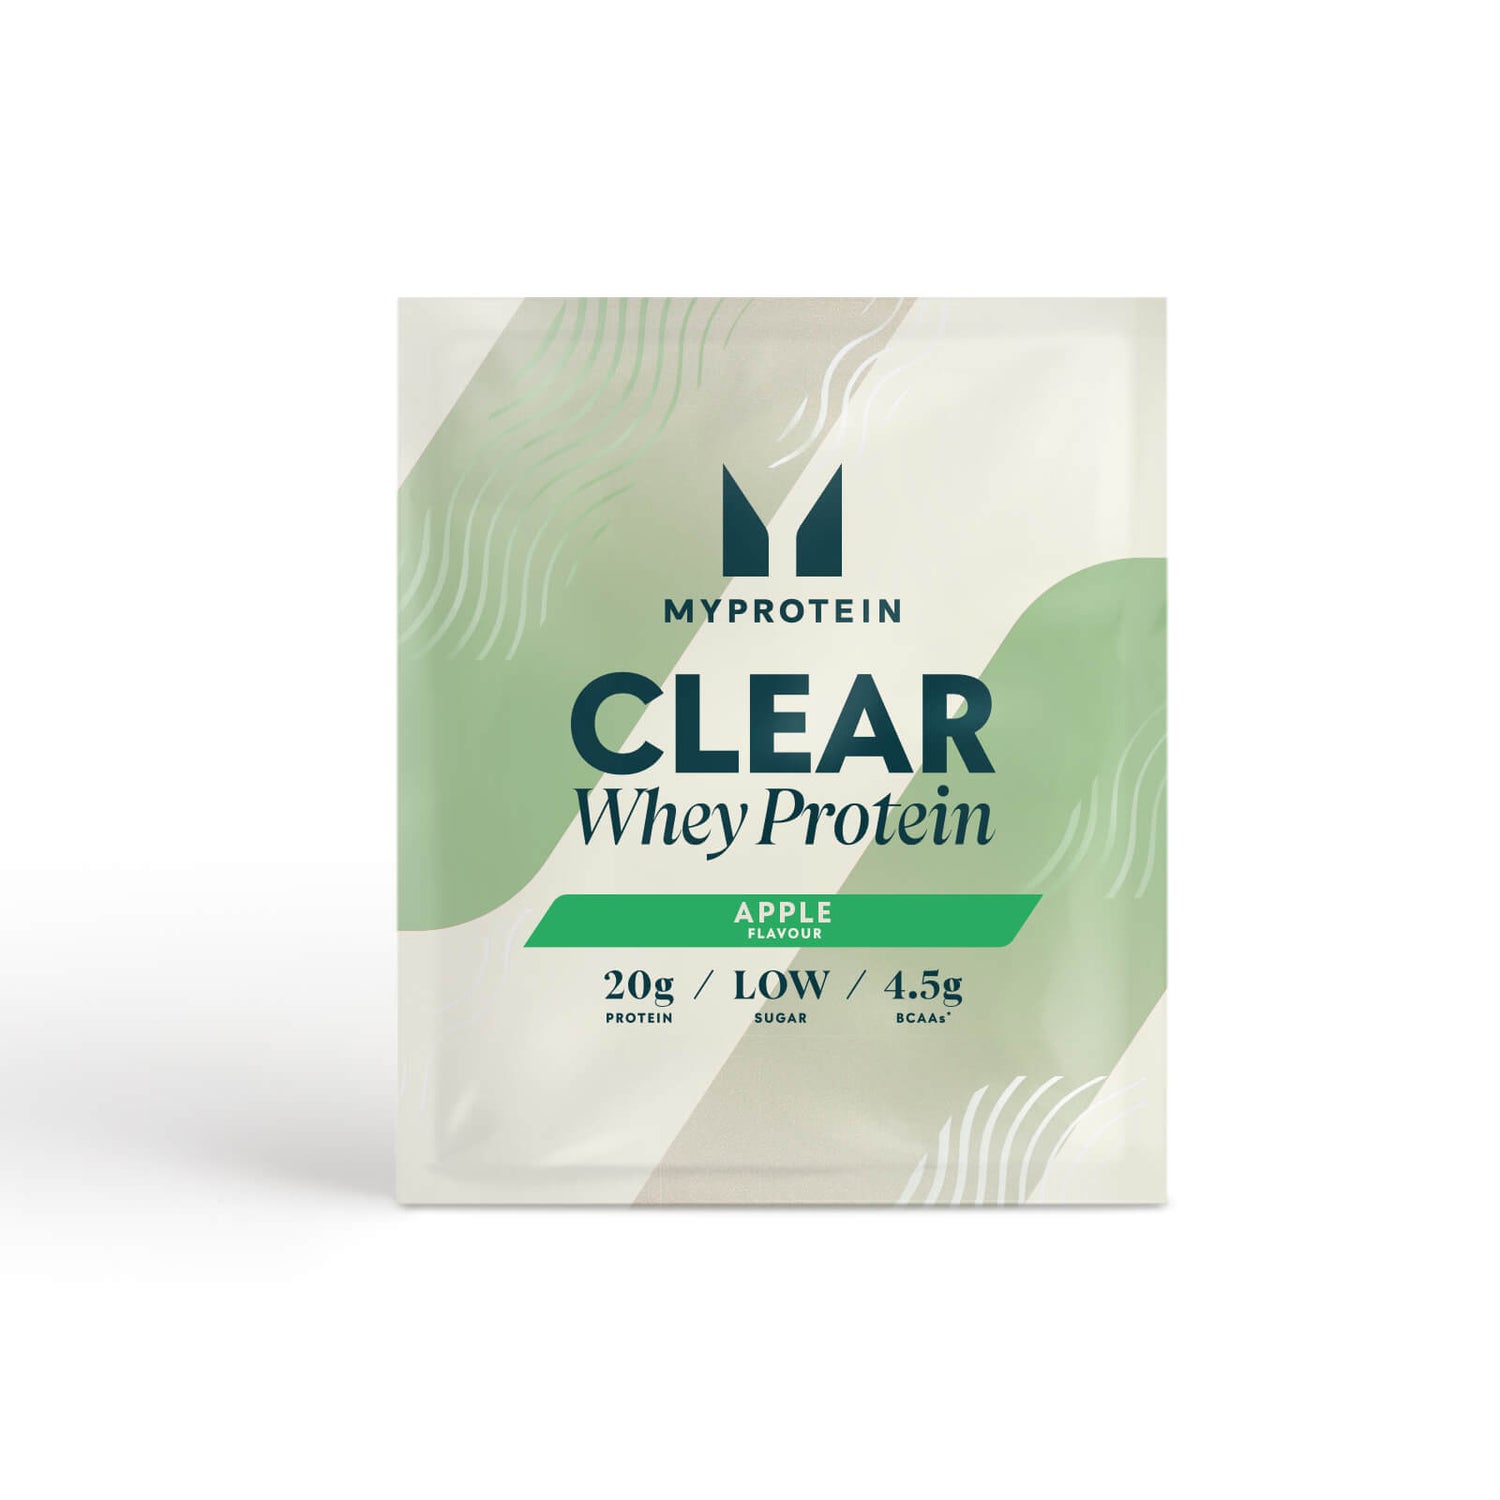 Clear Whey Protein (Sample) - 1servings - Apple